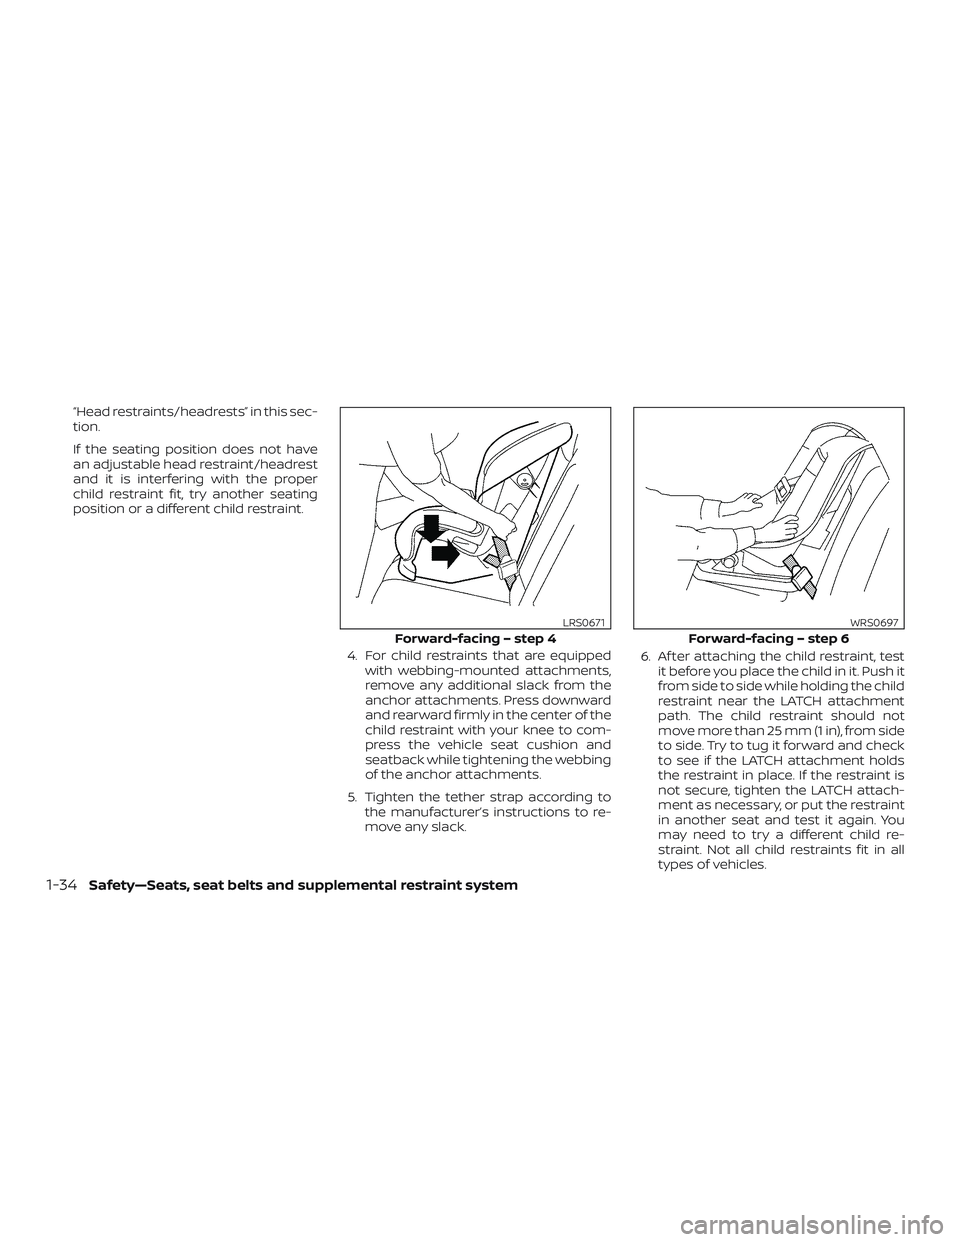 NISSAN MICRA 2023  Owners Manual “Head restraints/headrests” in this sec-
tion.
If the seating position does not have
an adjustable head restraint/headrest
and it is interfering with the proper
child restraint fit, try another se